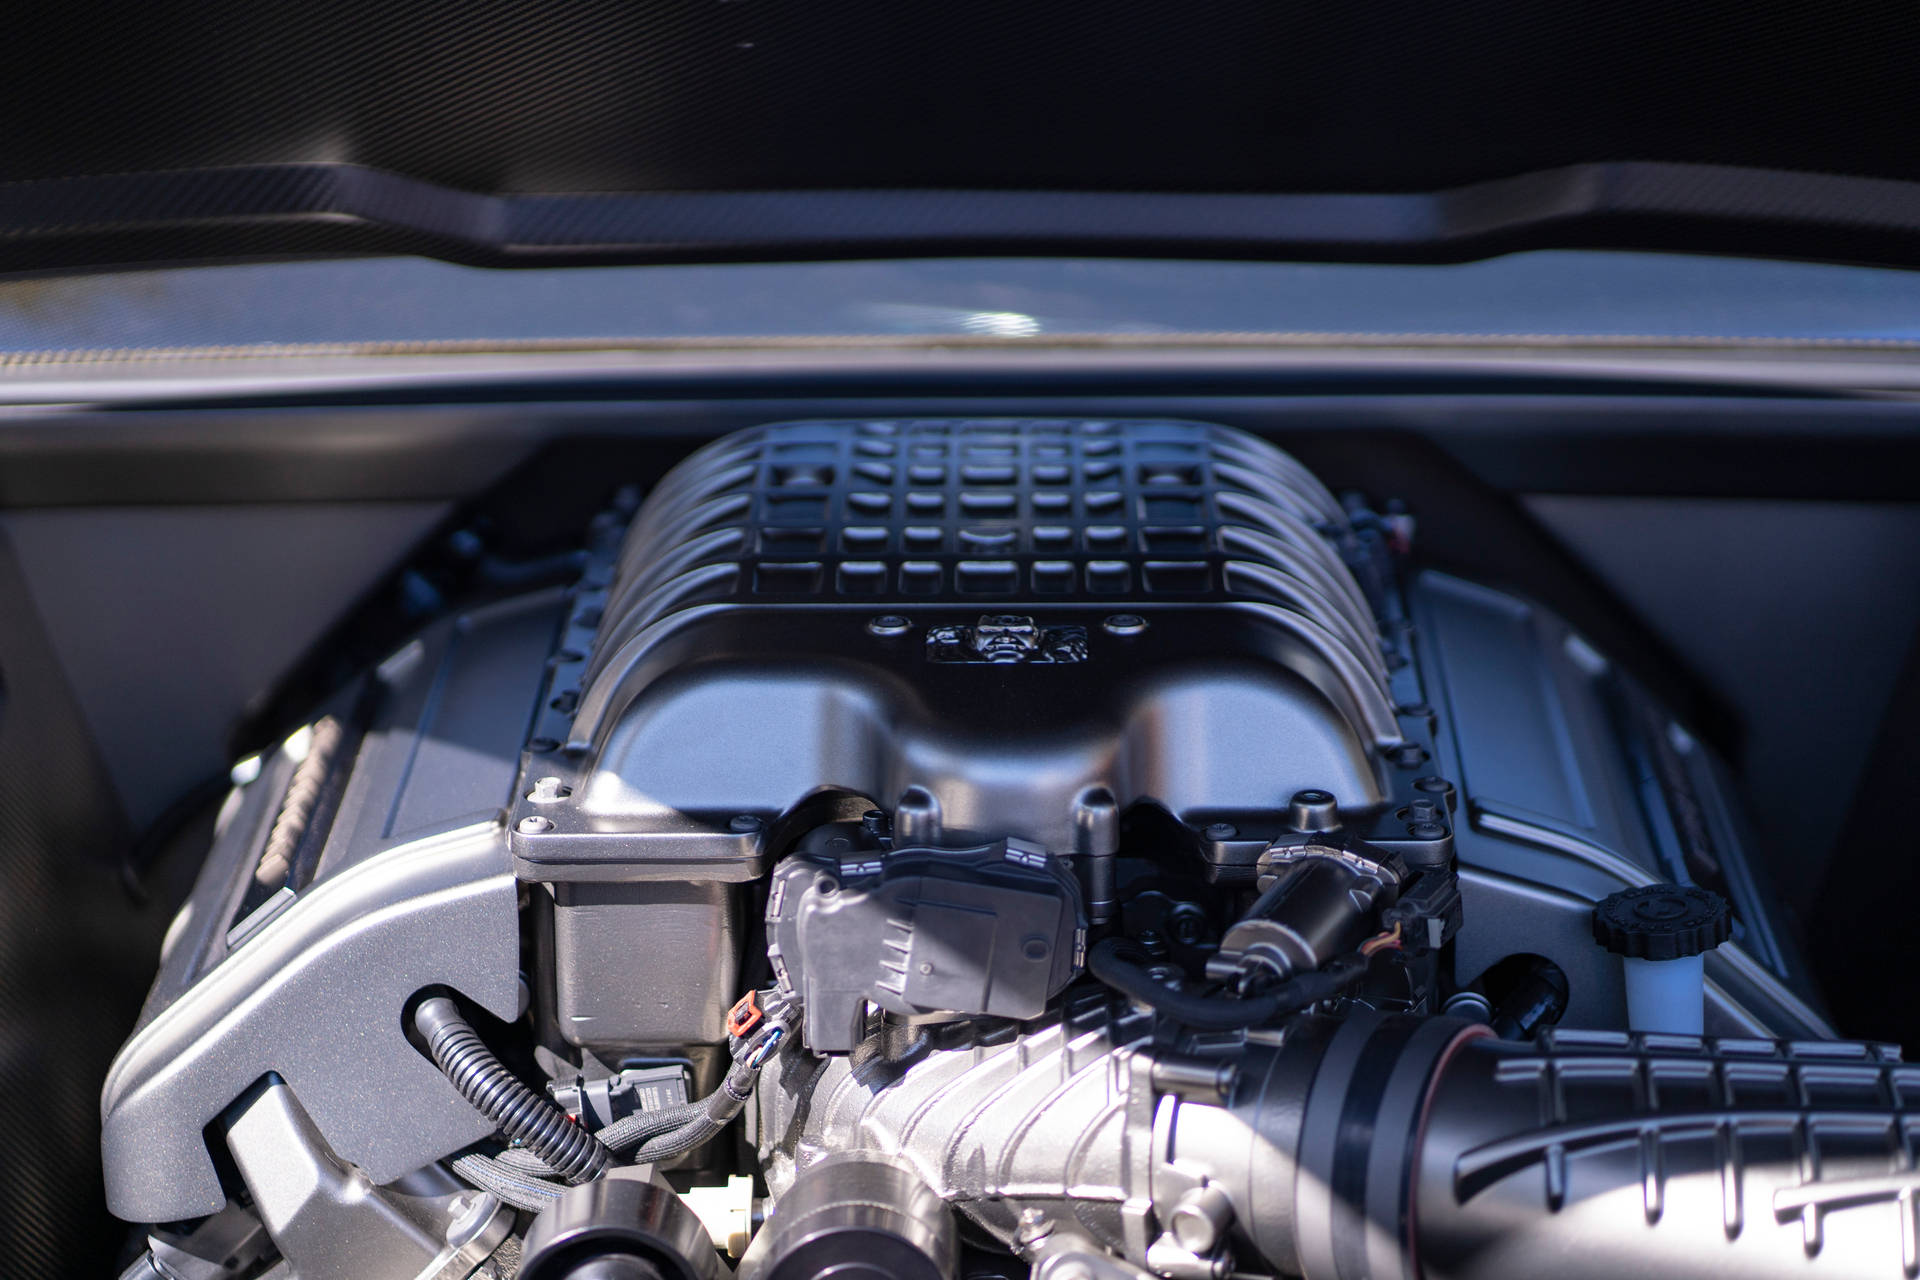 An Up-close Look At A Black And Silver Car Engine